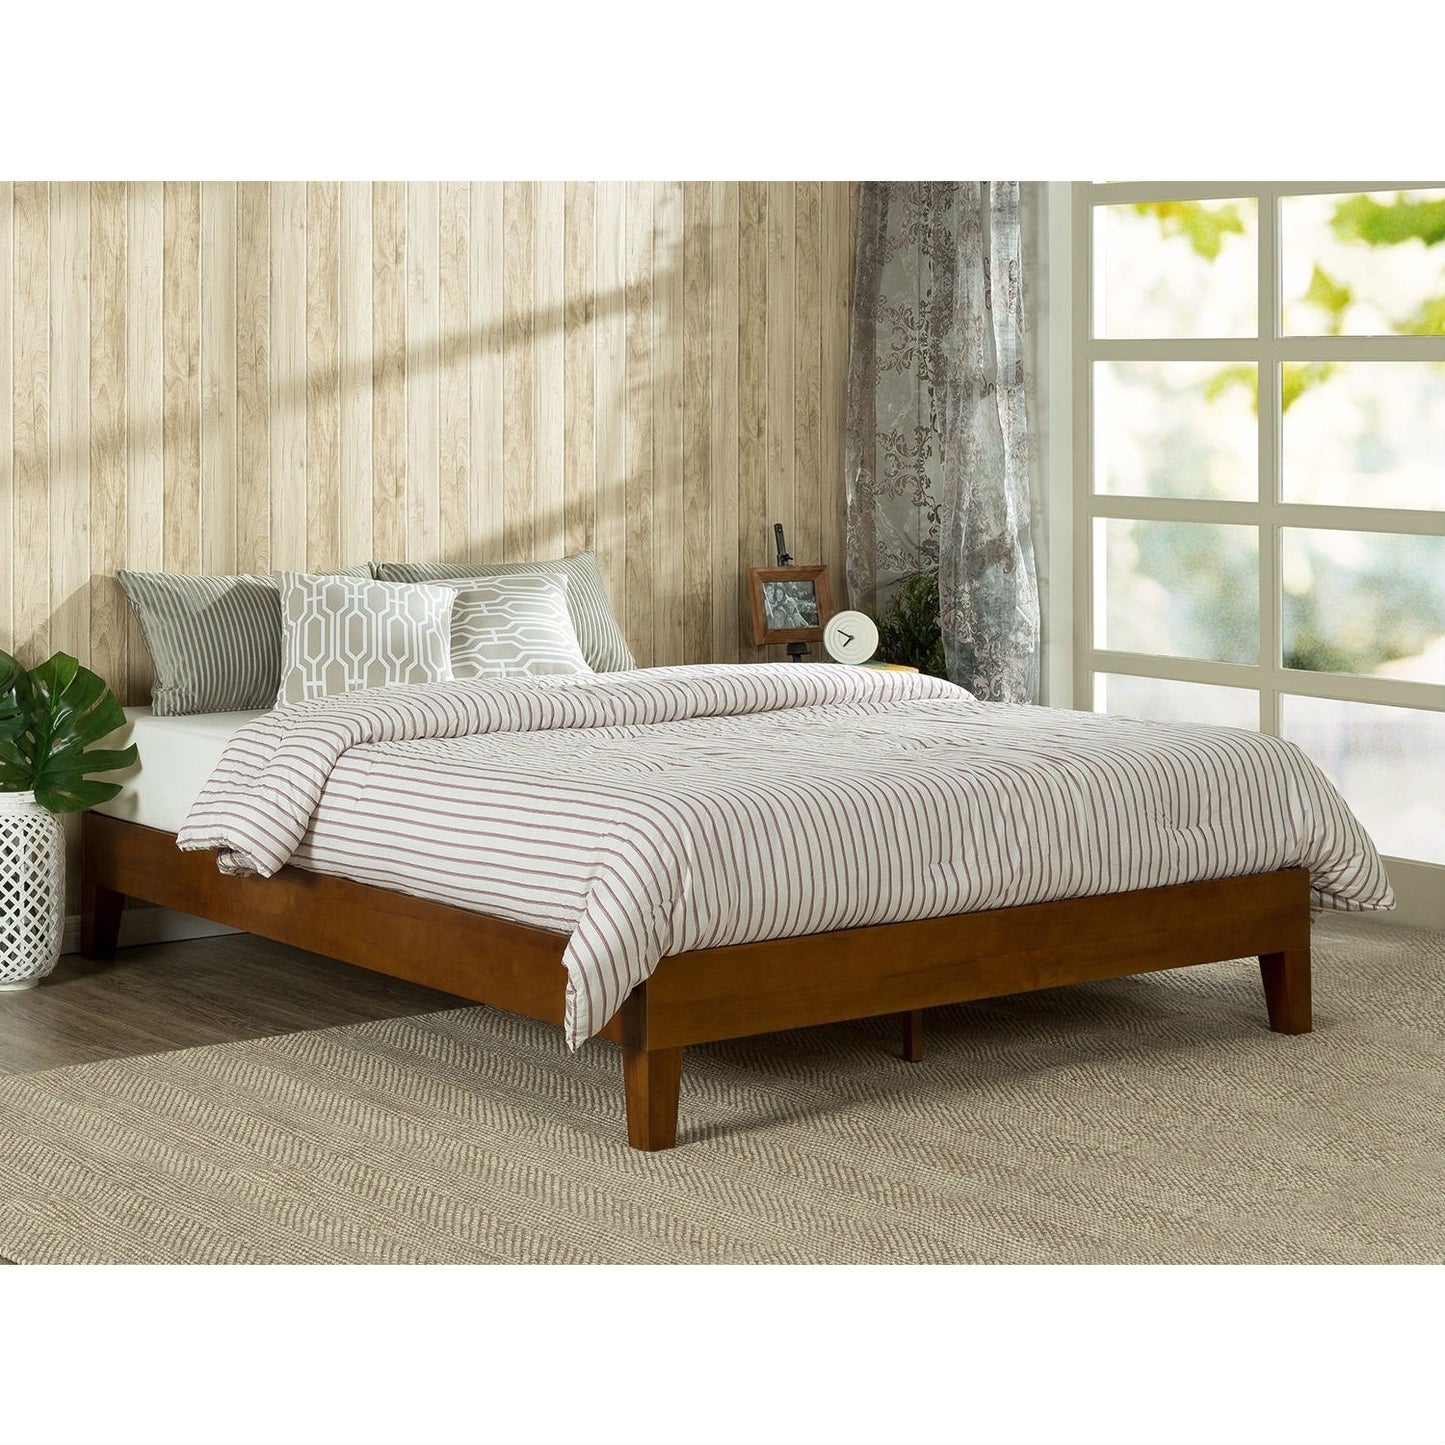 Queen size Solid Wood Low Profile Platform Bed Frame in Cherry Finish